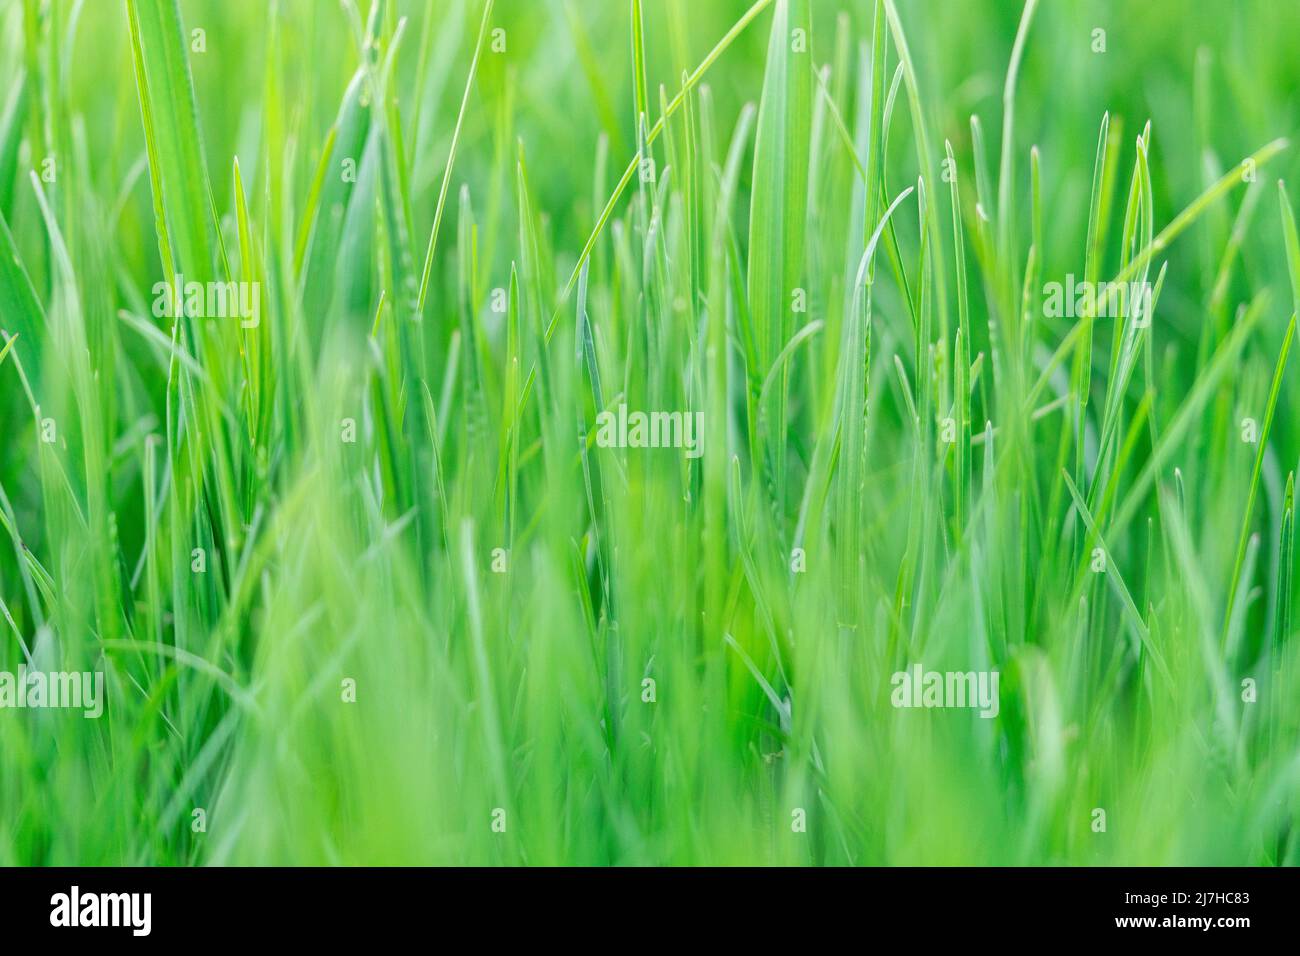 Background of green fresh grass side view spear space Stock Photo